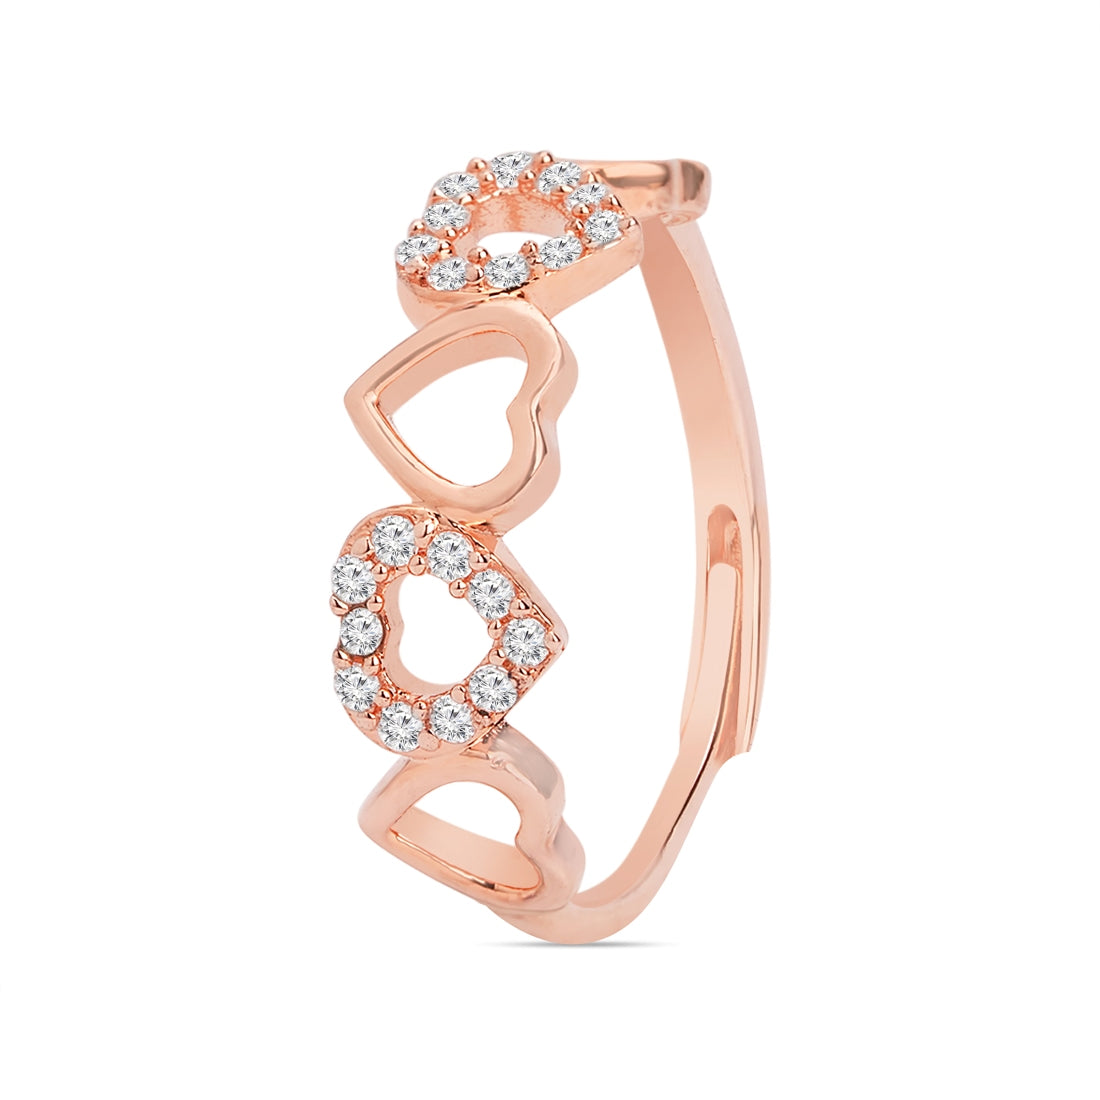 Heartfelt Charm Rose Gold Plated 925 Sterling Silver Women's Ring (Adjustable)